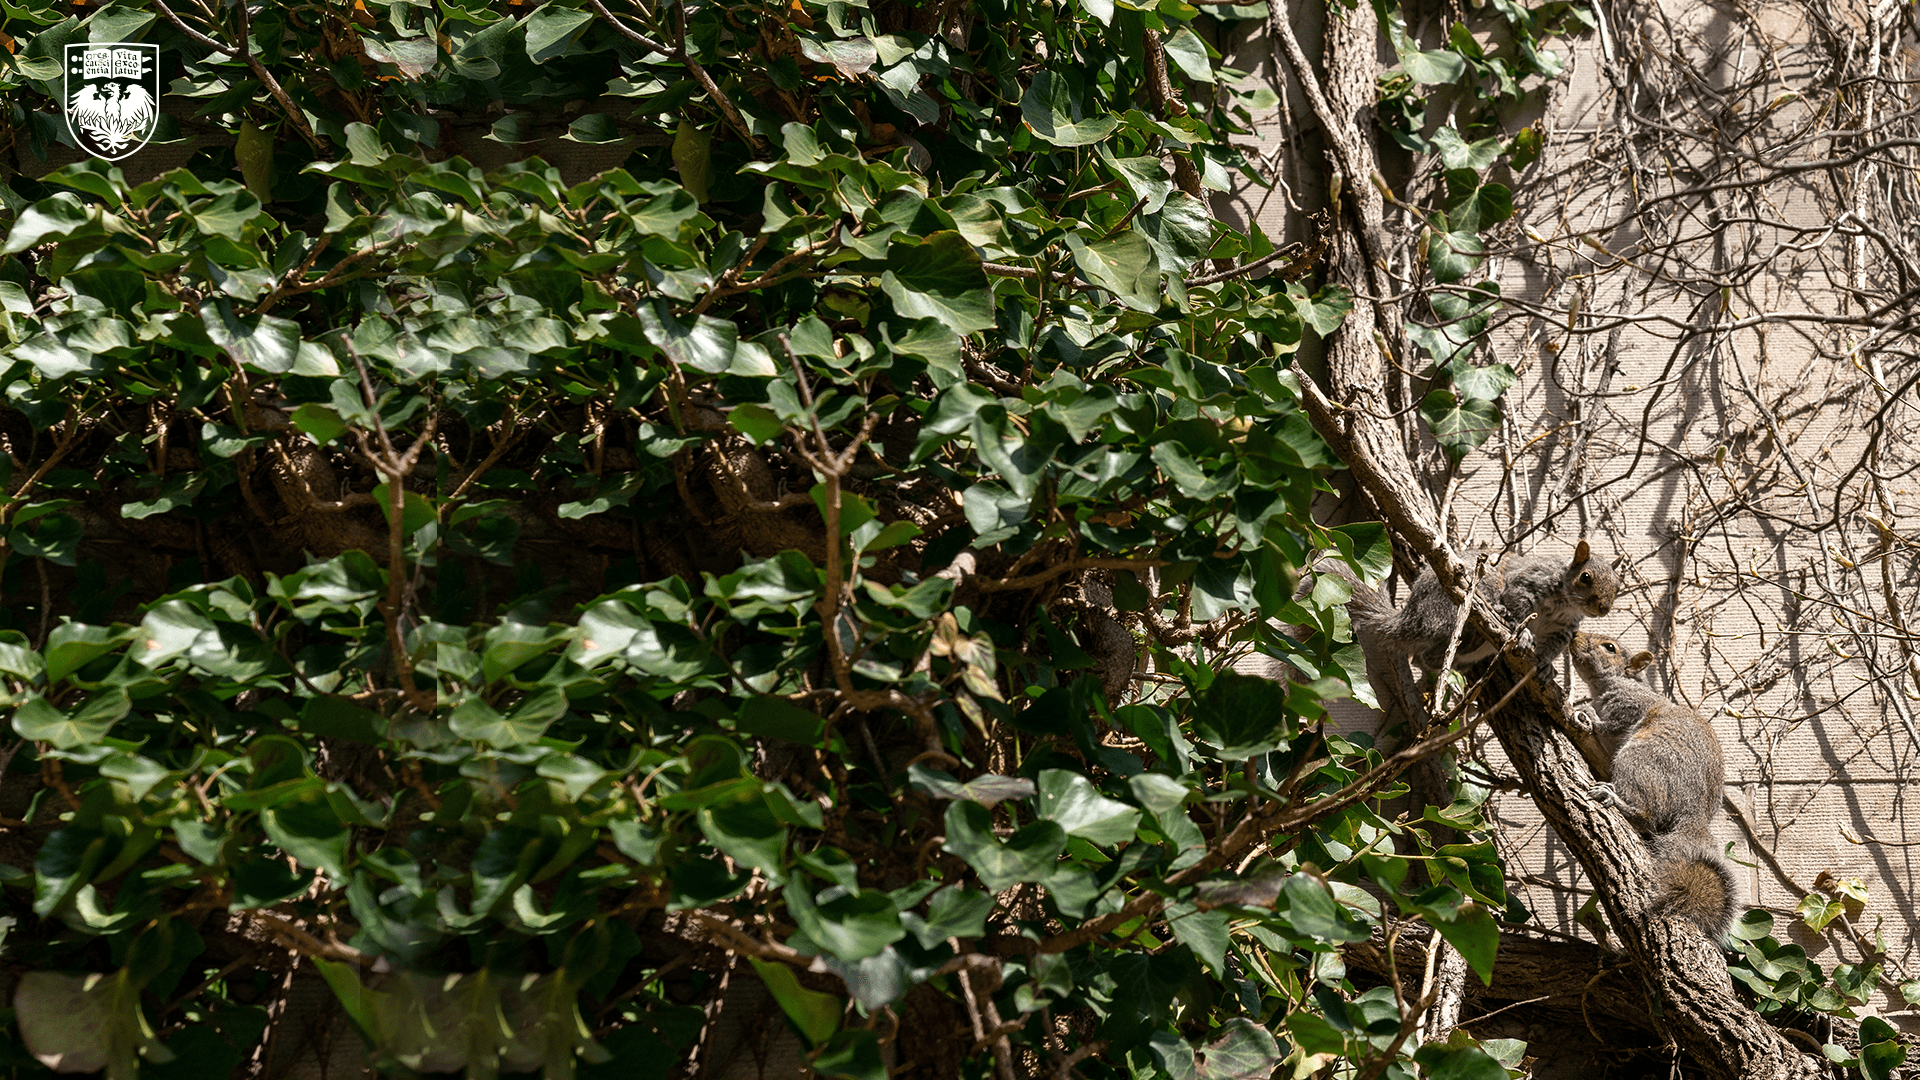 Two squirrels on a tree branch surrounded by green leaves